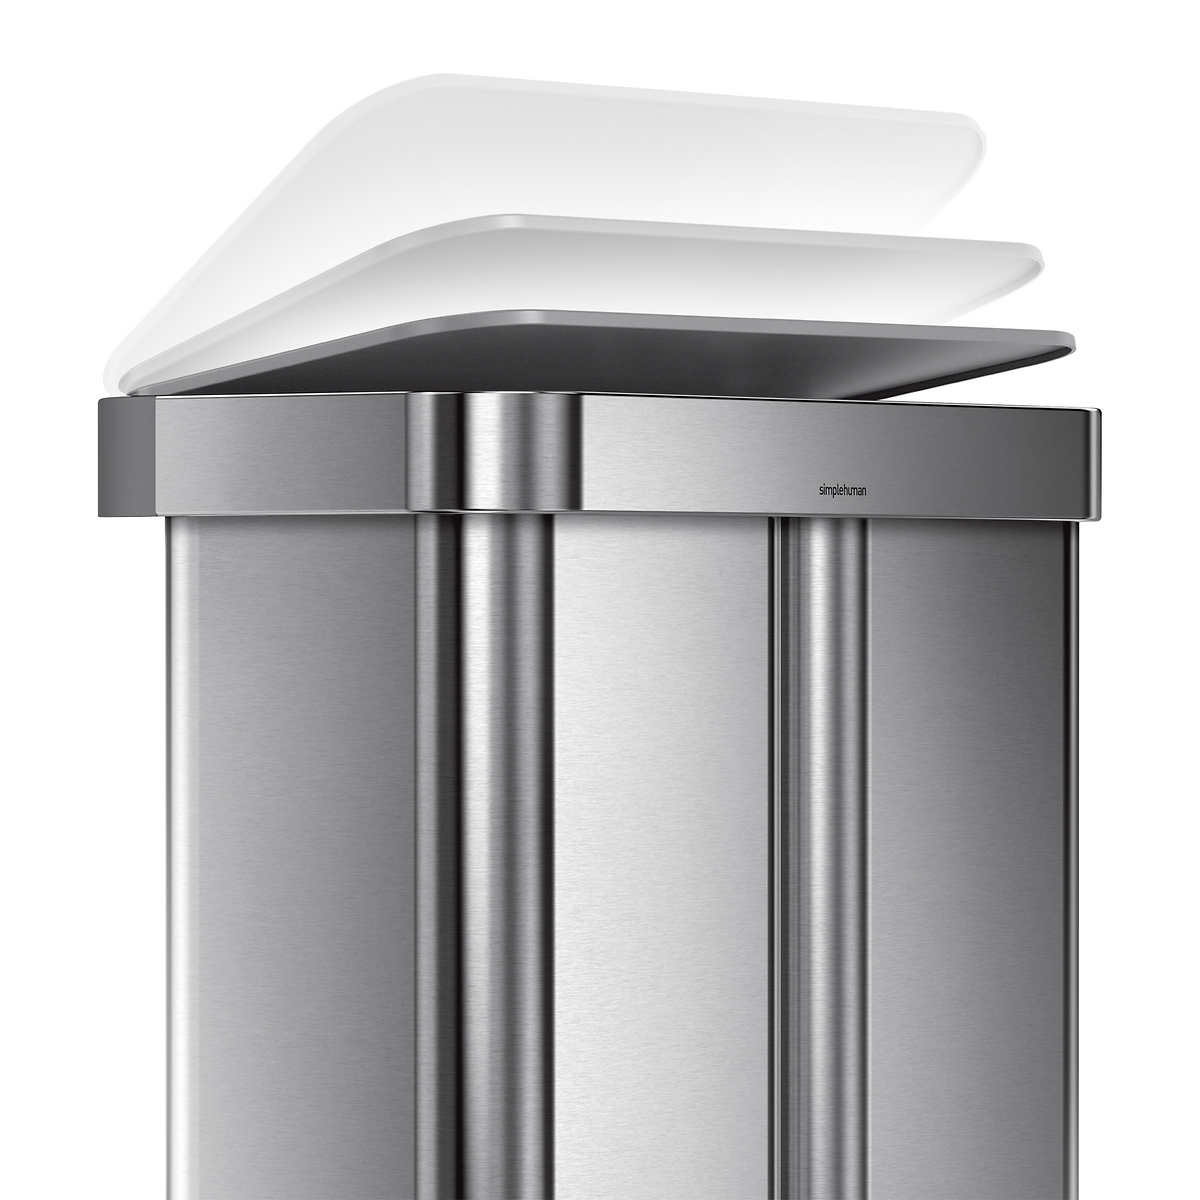 Costco Deals - 🗑This @simplehuman #stainlesssteel 45L